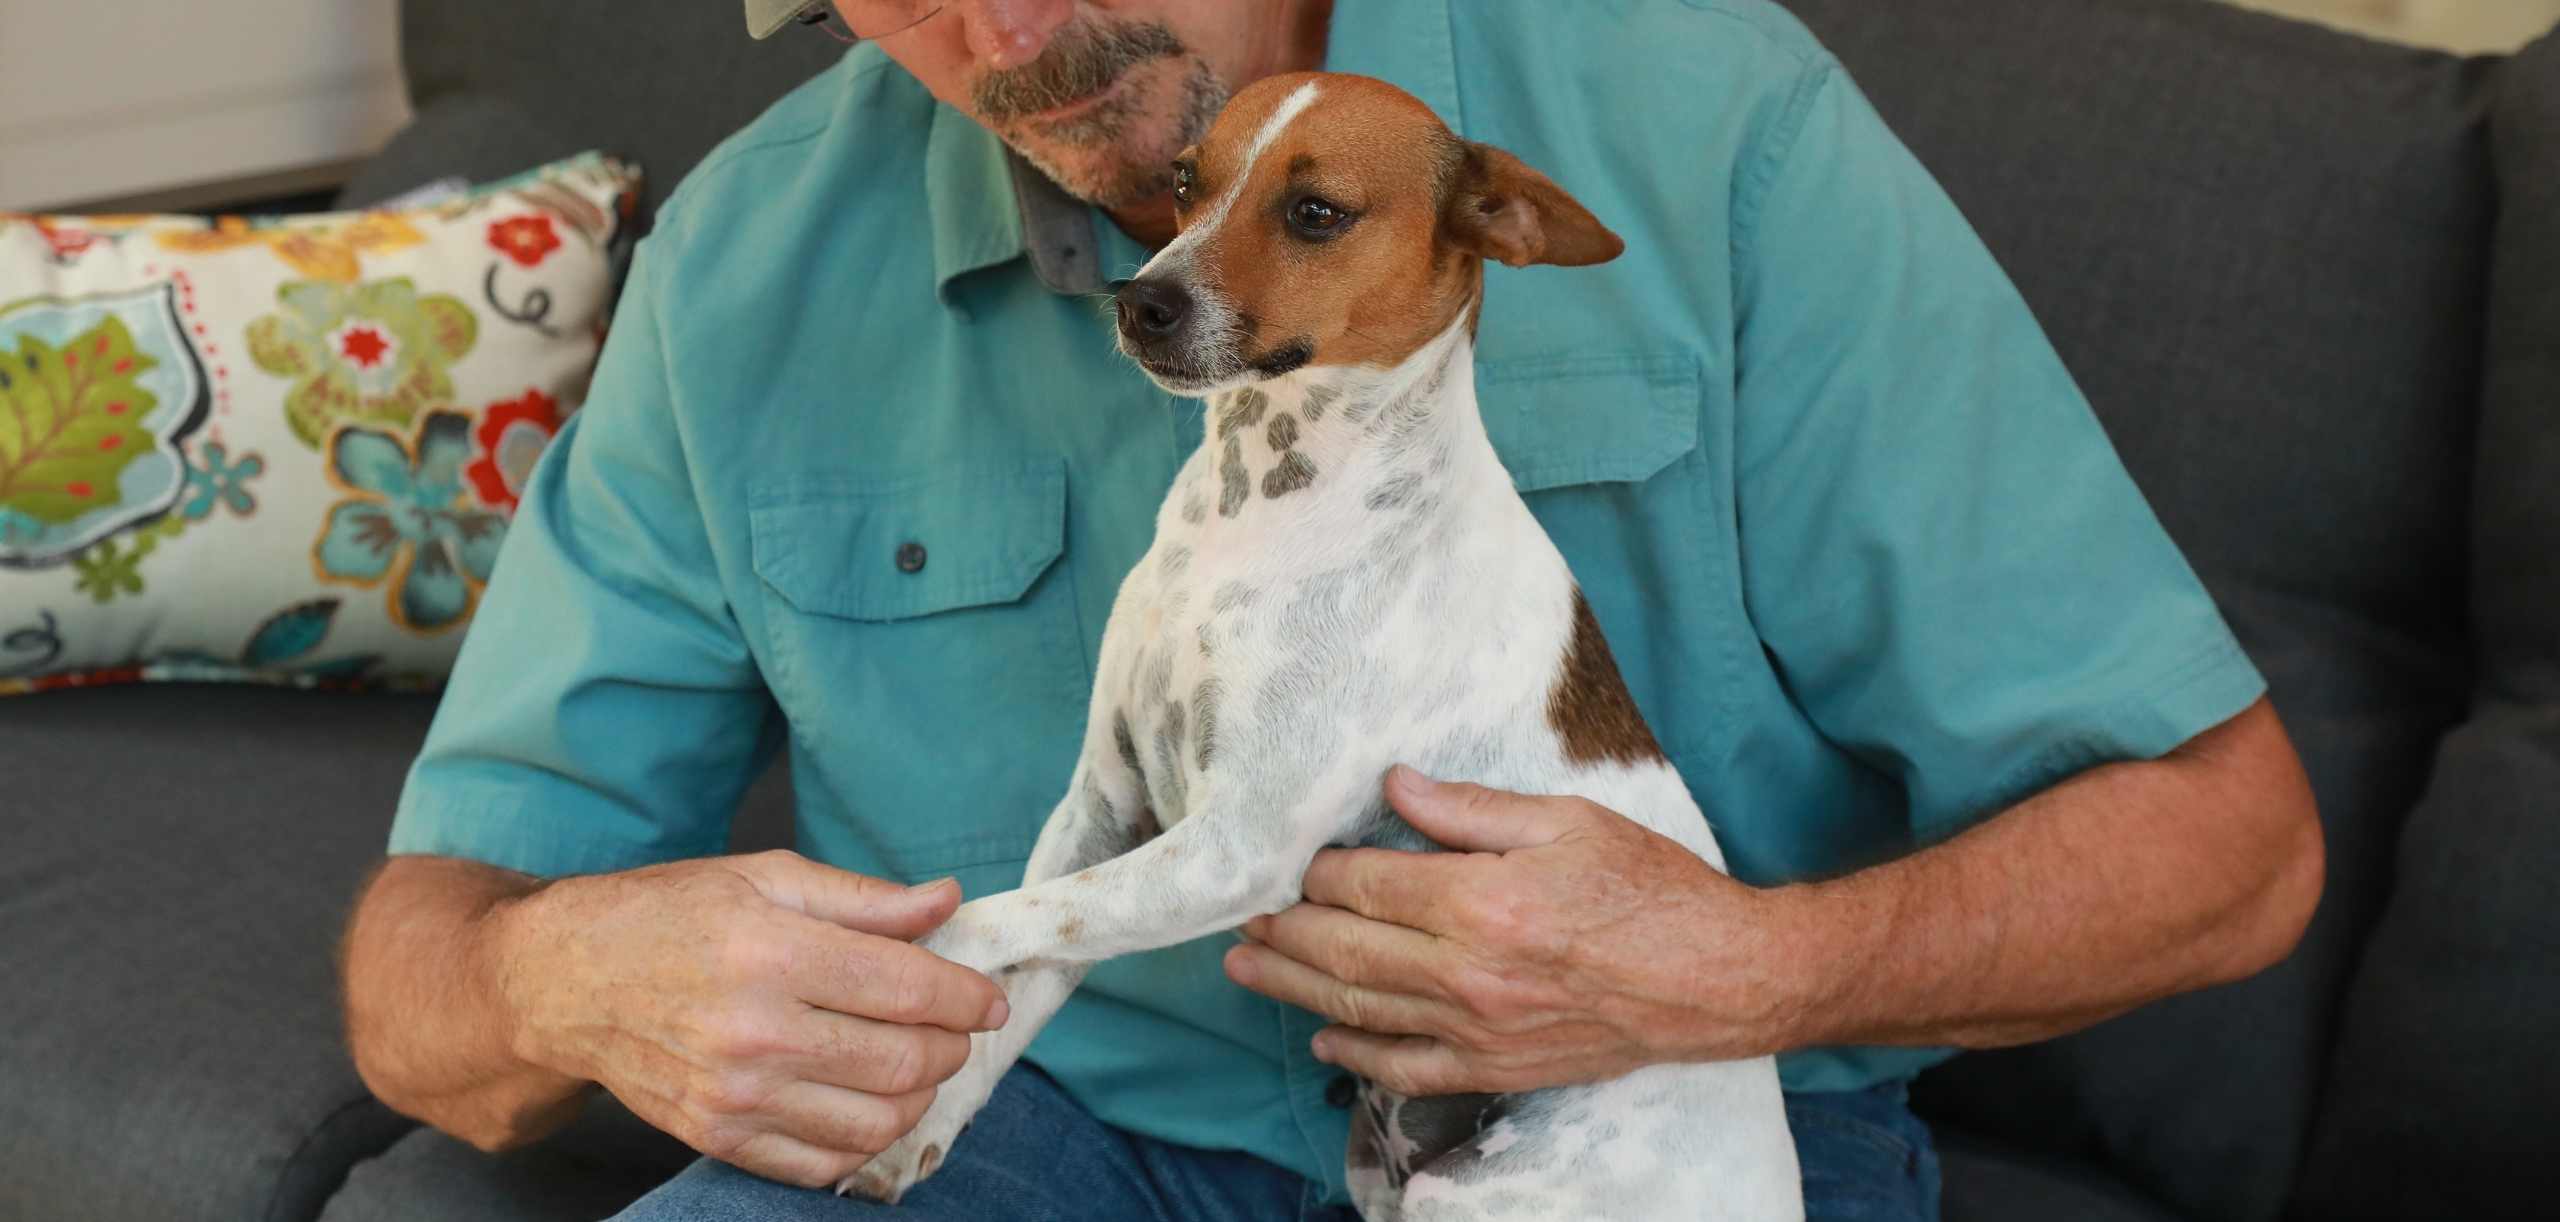 Photo of Jim using The Masterson Method light touch techniques on a small dog on his lap